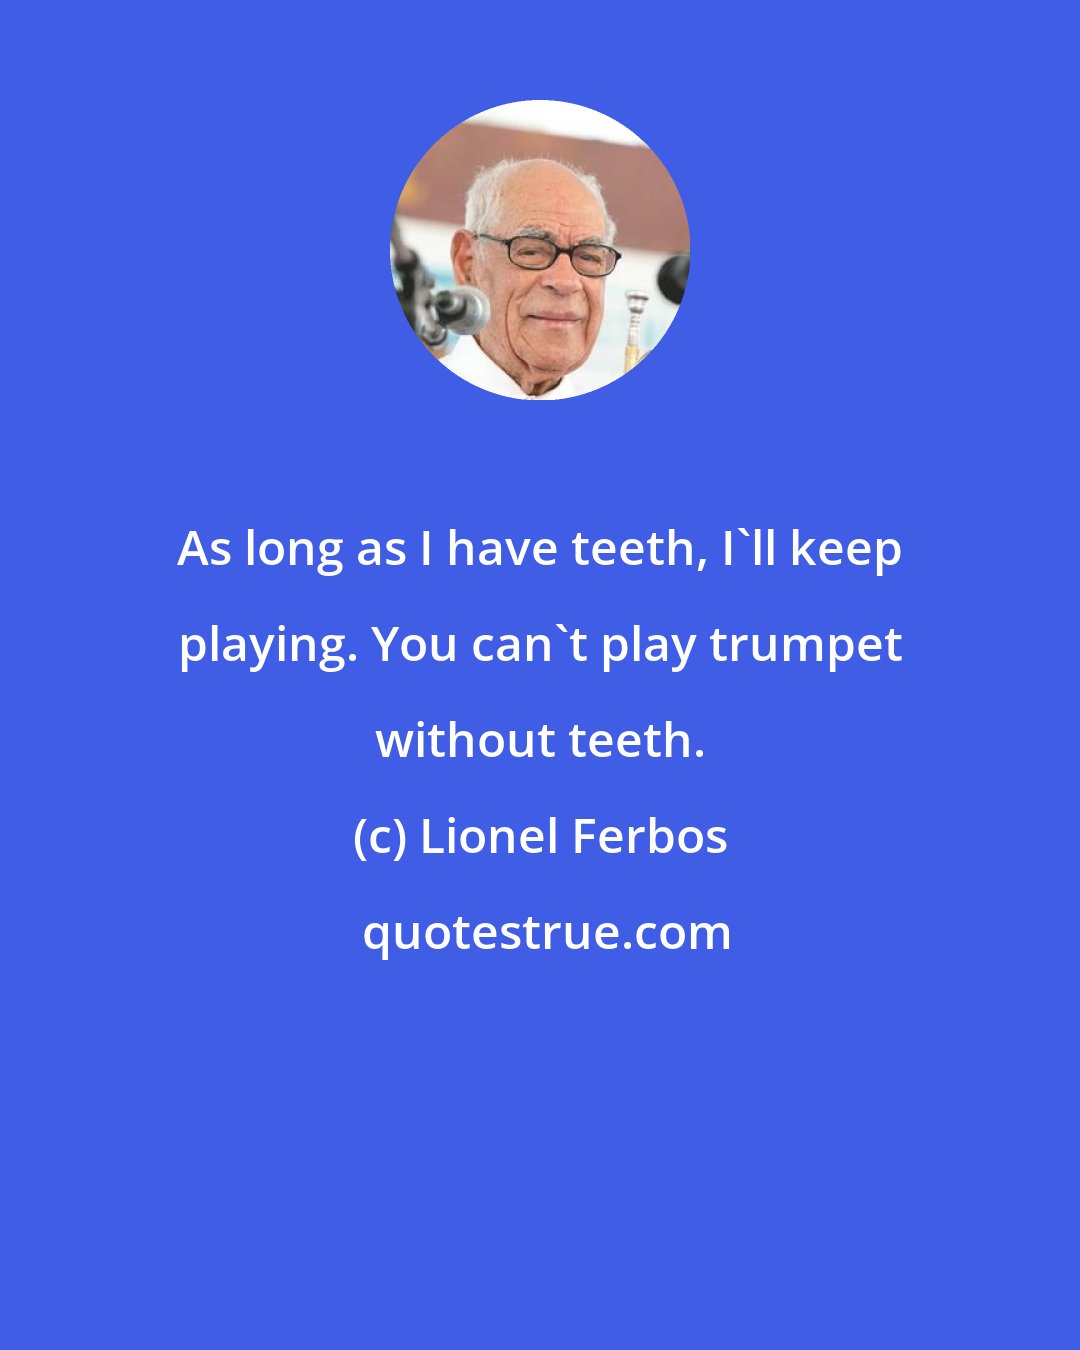 Lionel Ferbos: As long as I have teeth, I'll keep playing. You can't play trumpet without teeth.